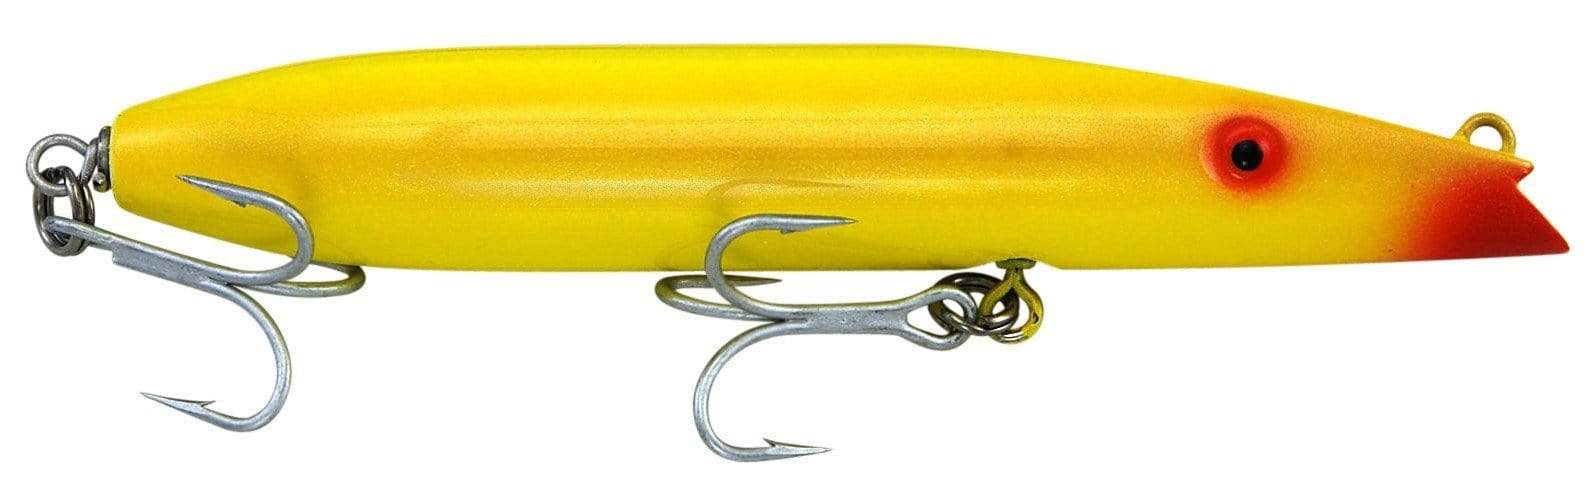 Light Tackle - The Saltwater Edge